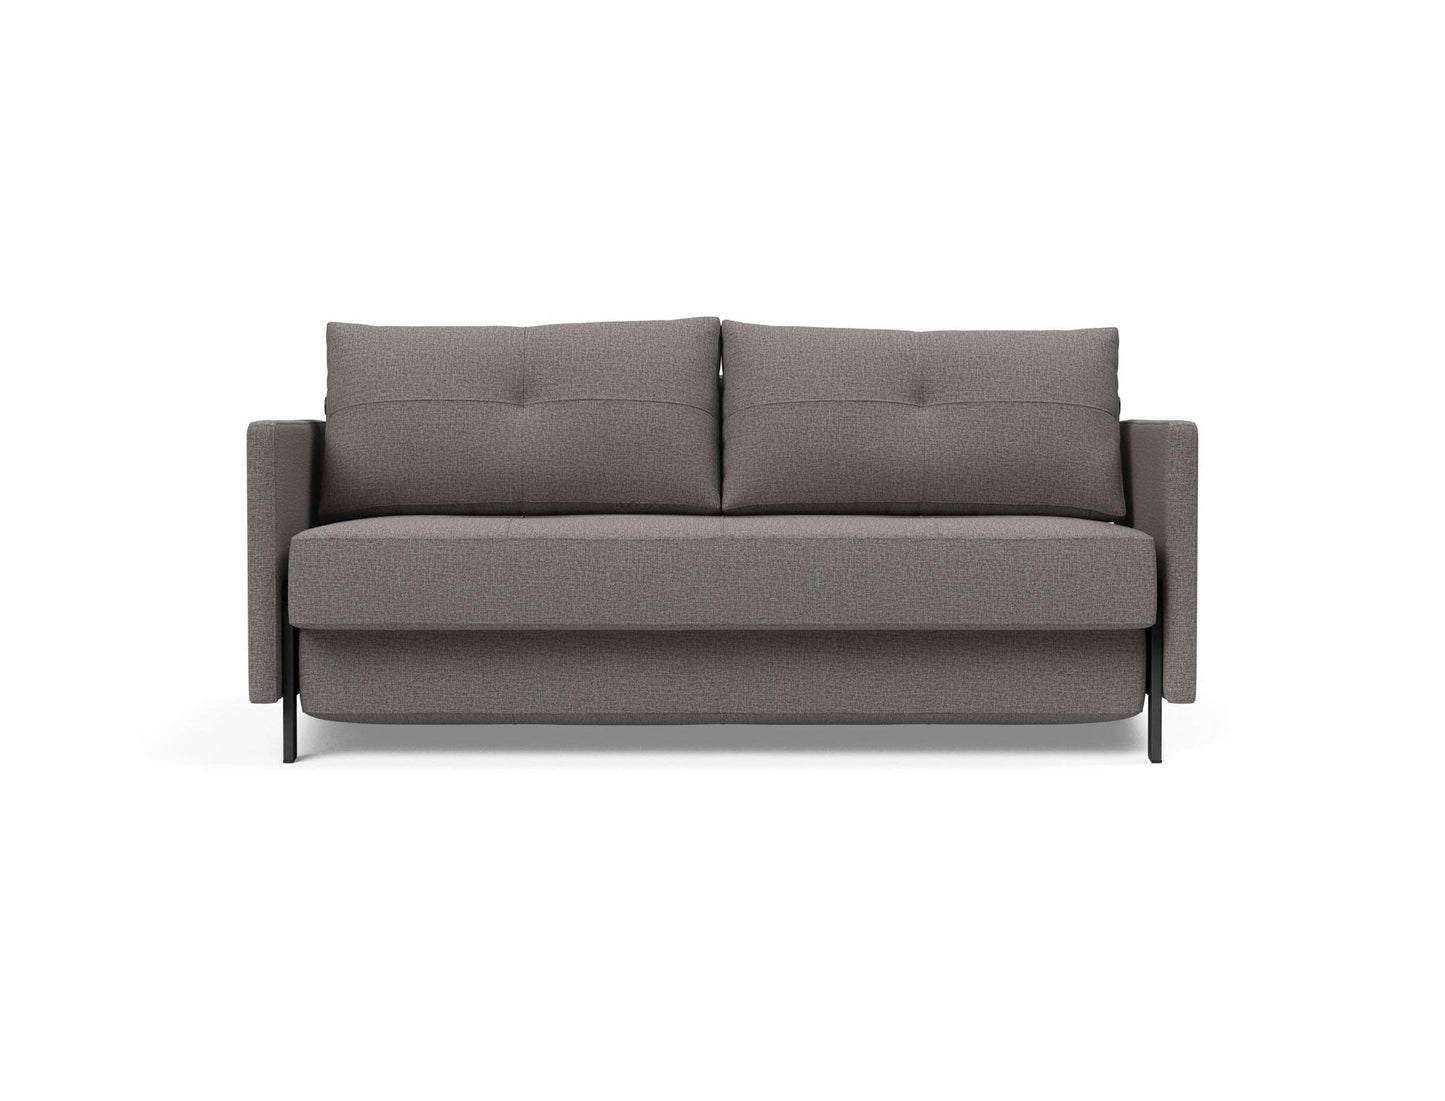 Innovation Living Cubed Sofa Bed with Arms Queen